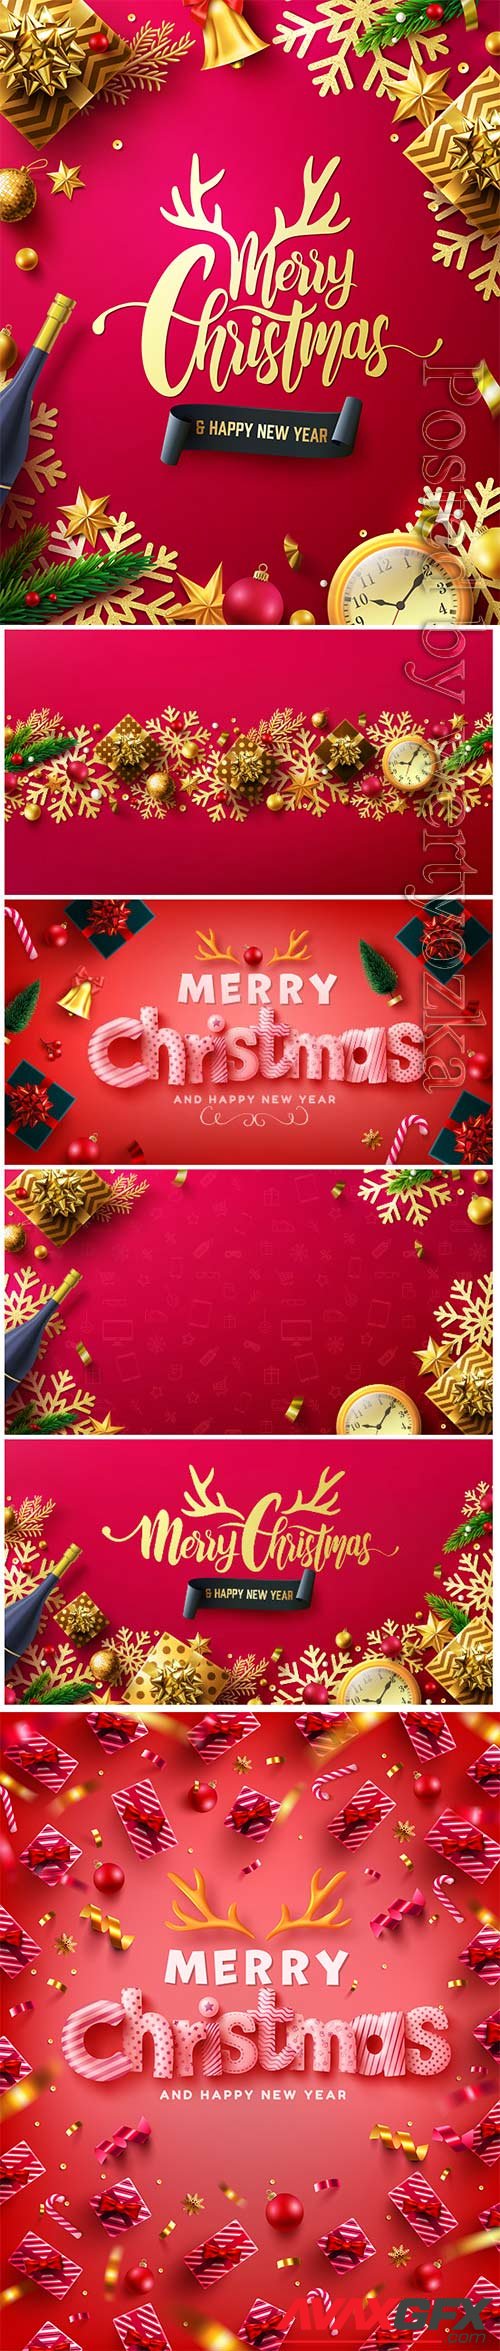 Vector of merry christmas & happy new year promotion poster or banner